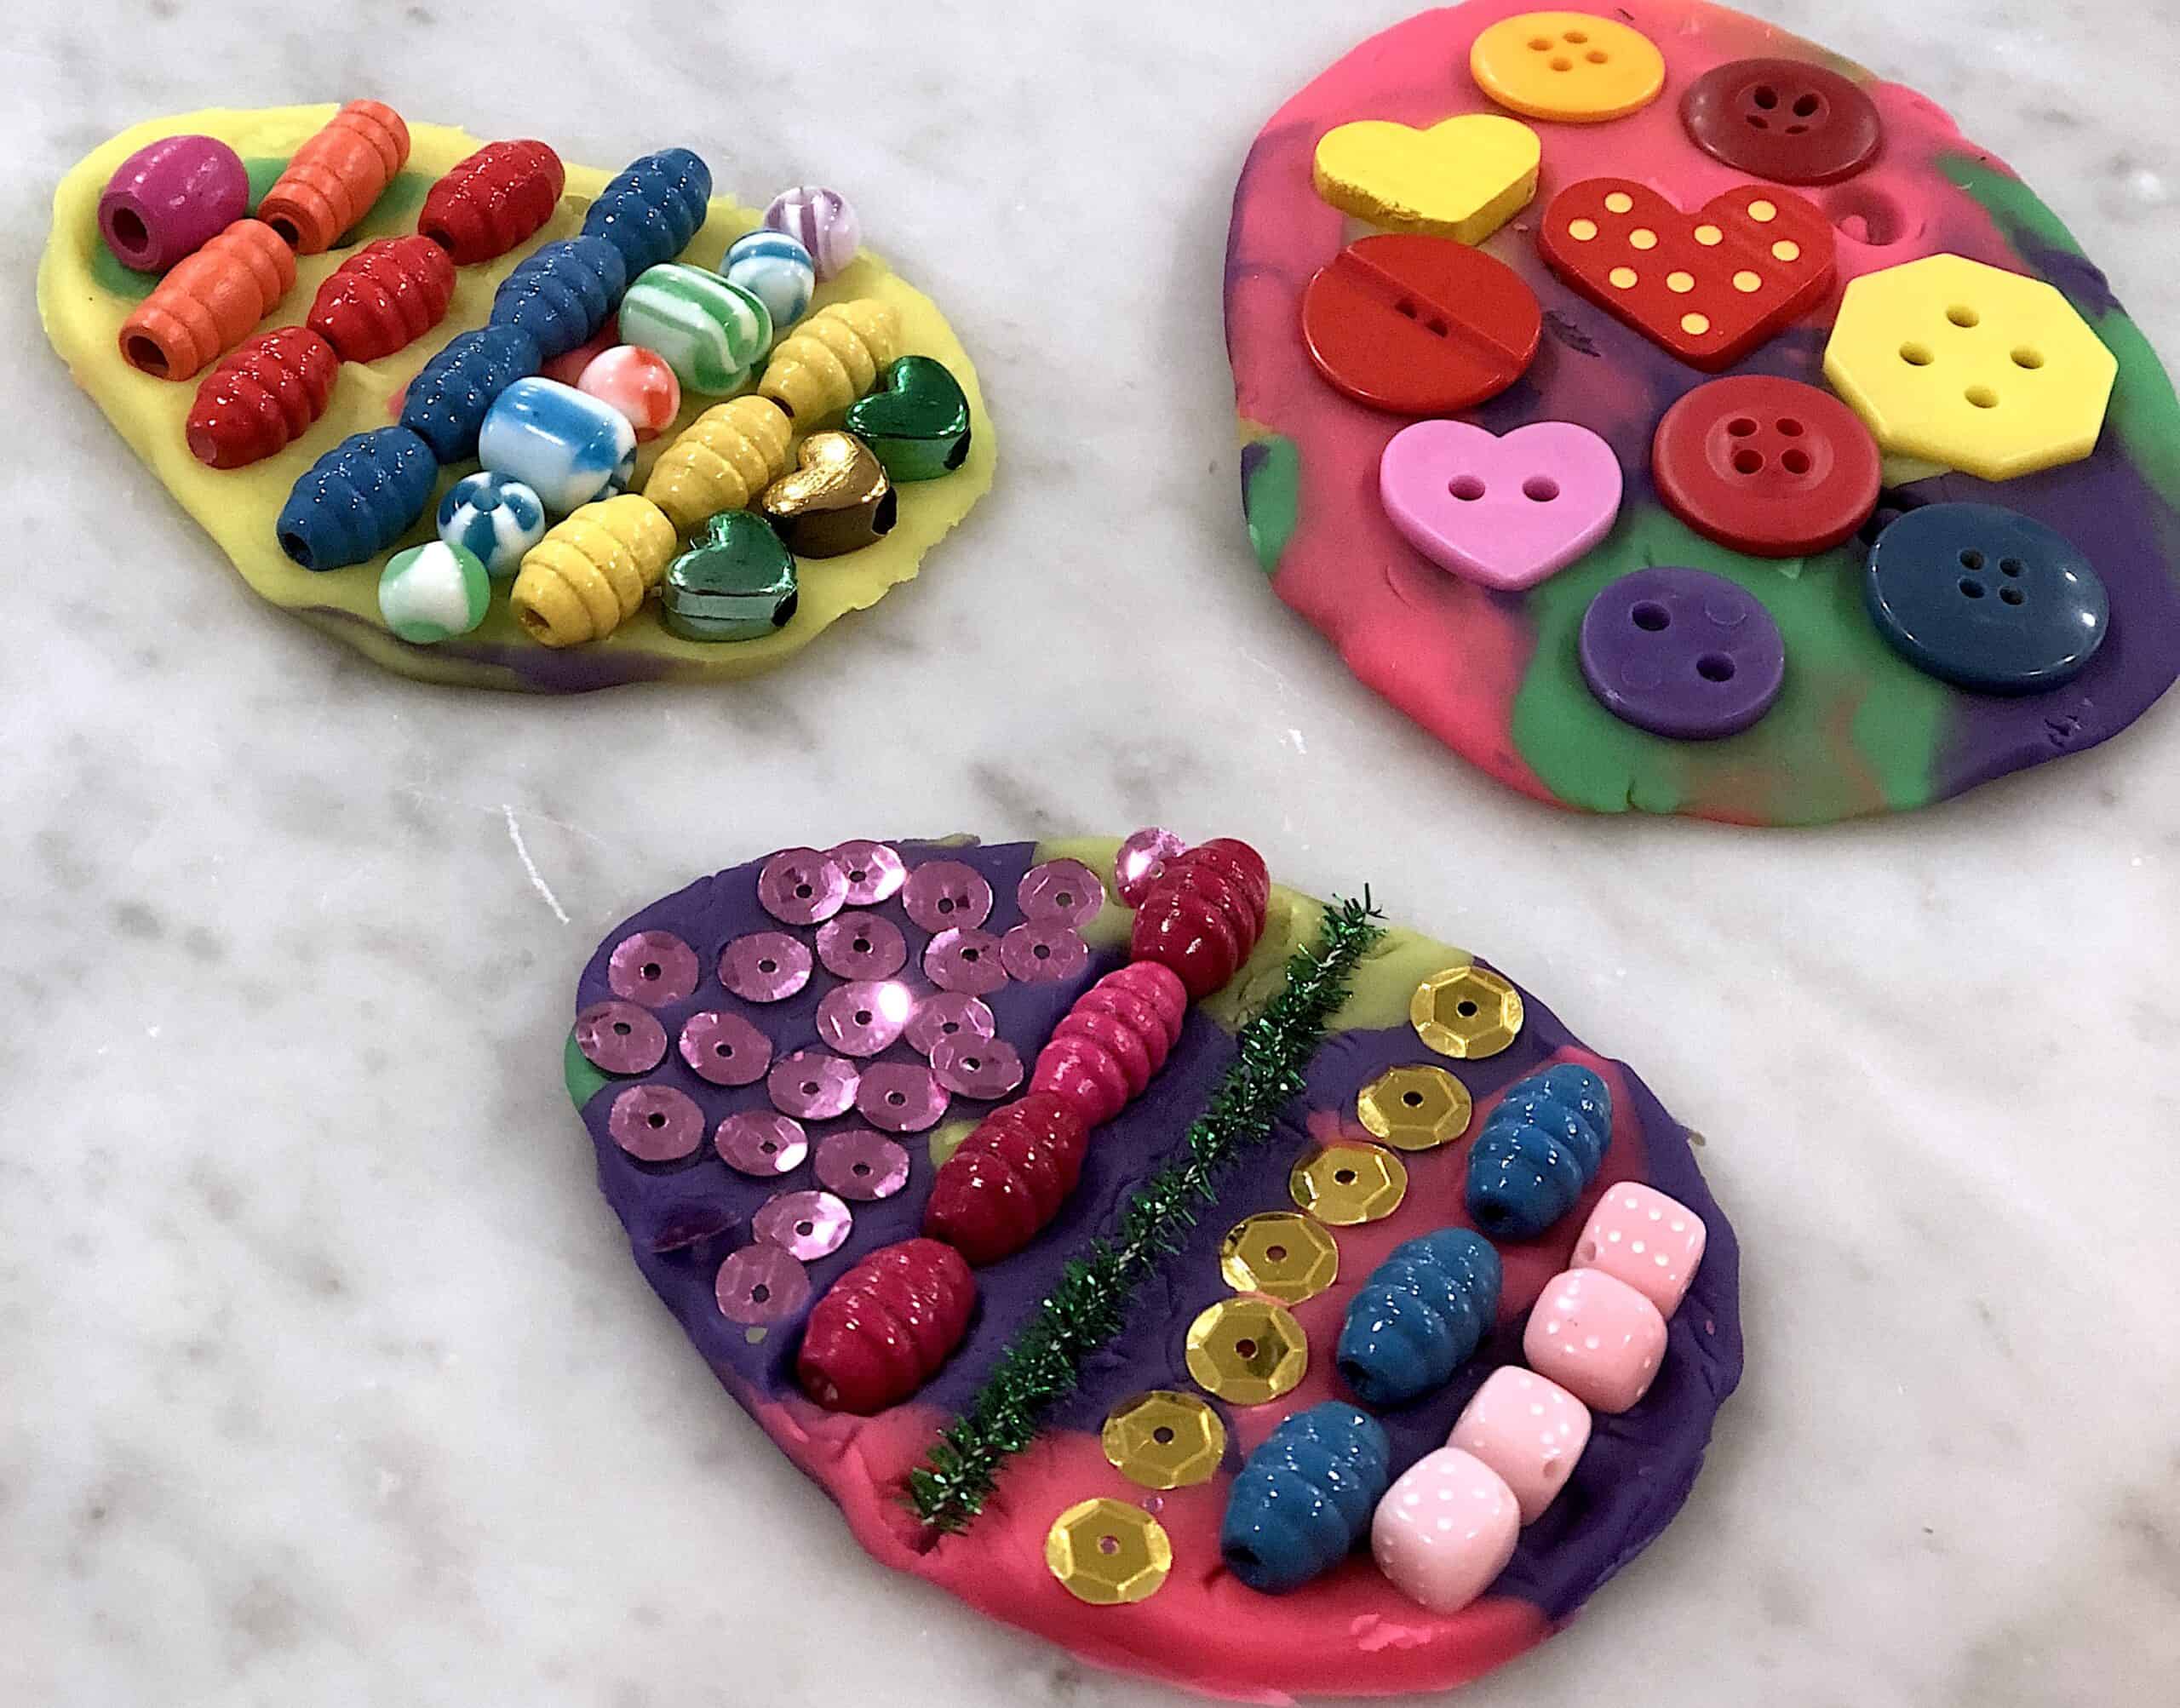 Easy Easter Crafts For Preschoolers: Play Dough Eggs